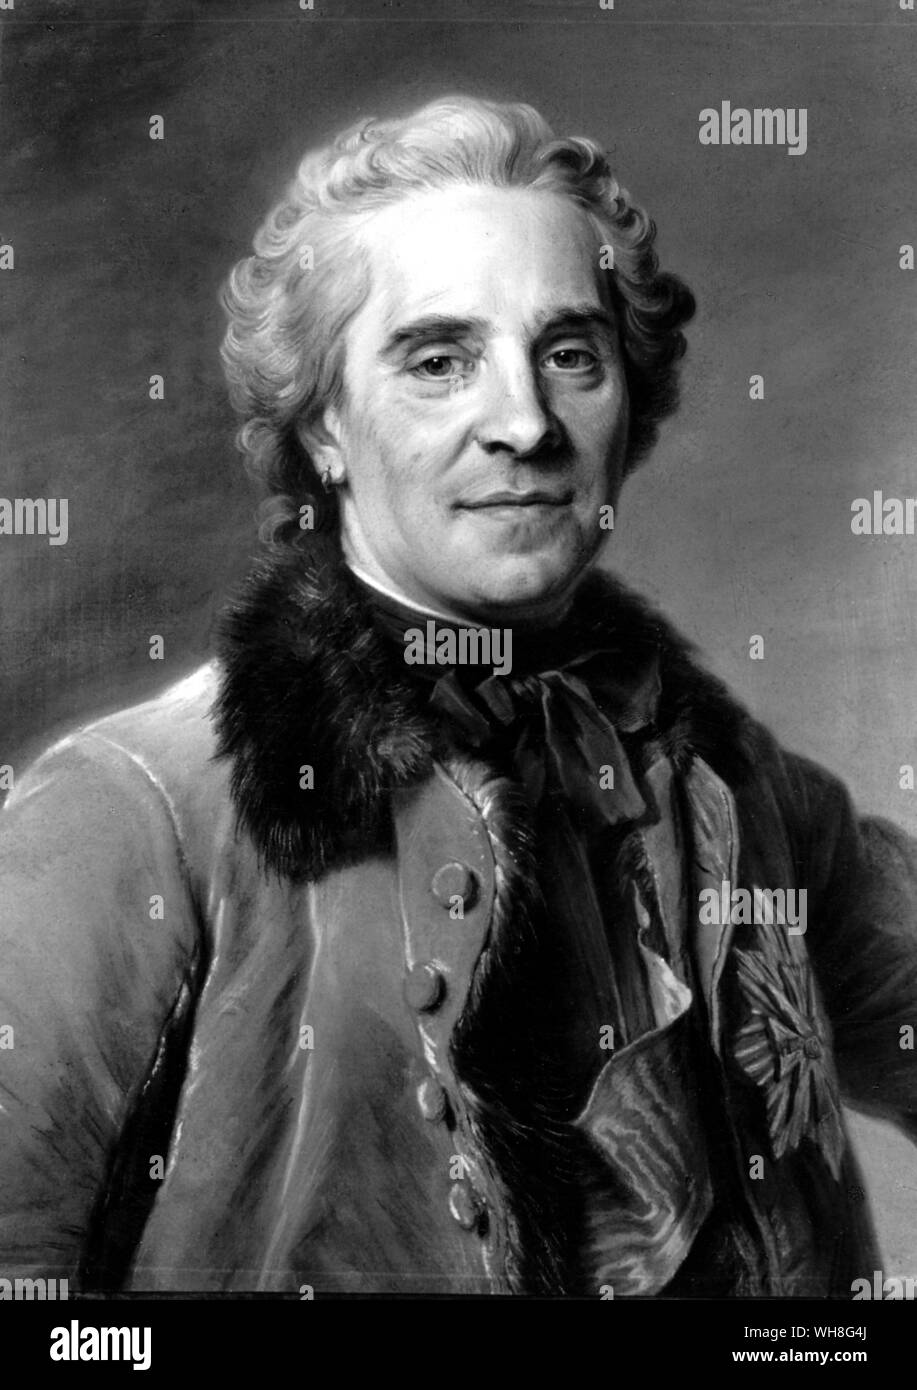 Maurice, comte de Saxe (German Moritz Graf von Sachsen) (1696-1750), Marshal General of France 1744, the natural son of Augustus II of Poland and of the countess Aurora Königsmarck. Frederick the Great by Nancy Mitford, page 108. Stock Photo